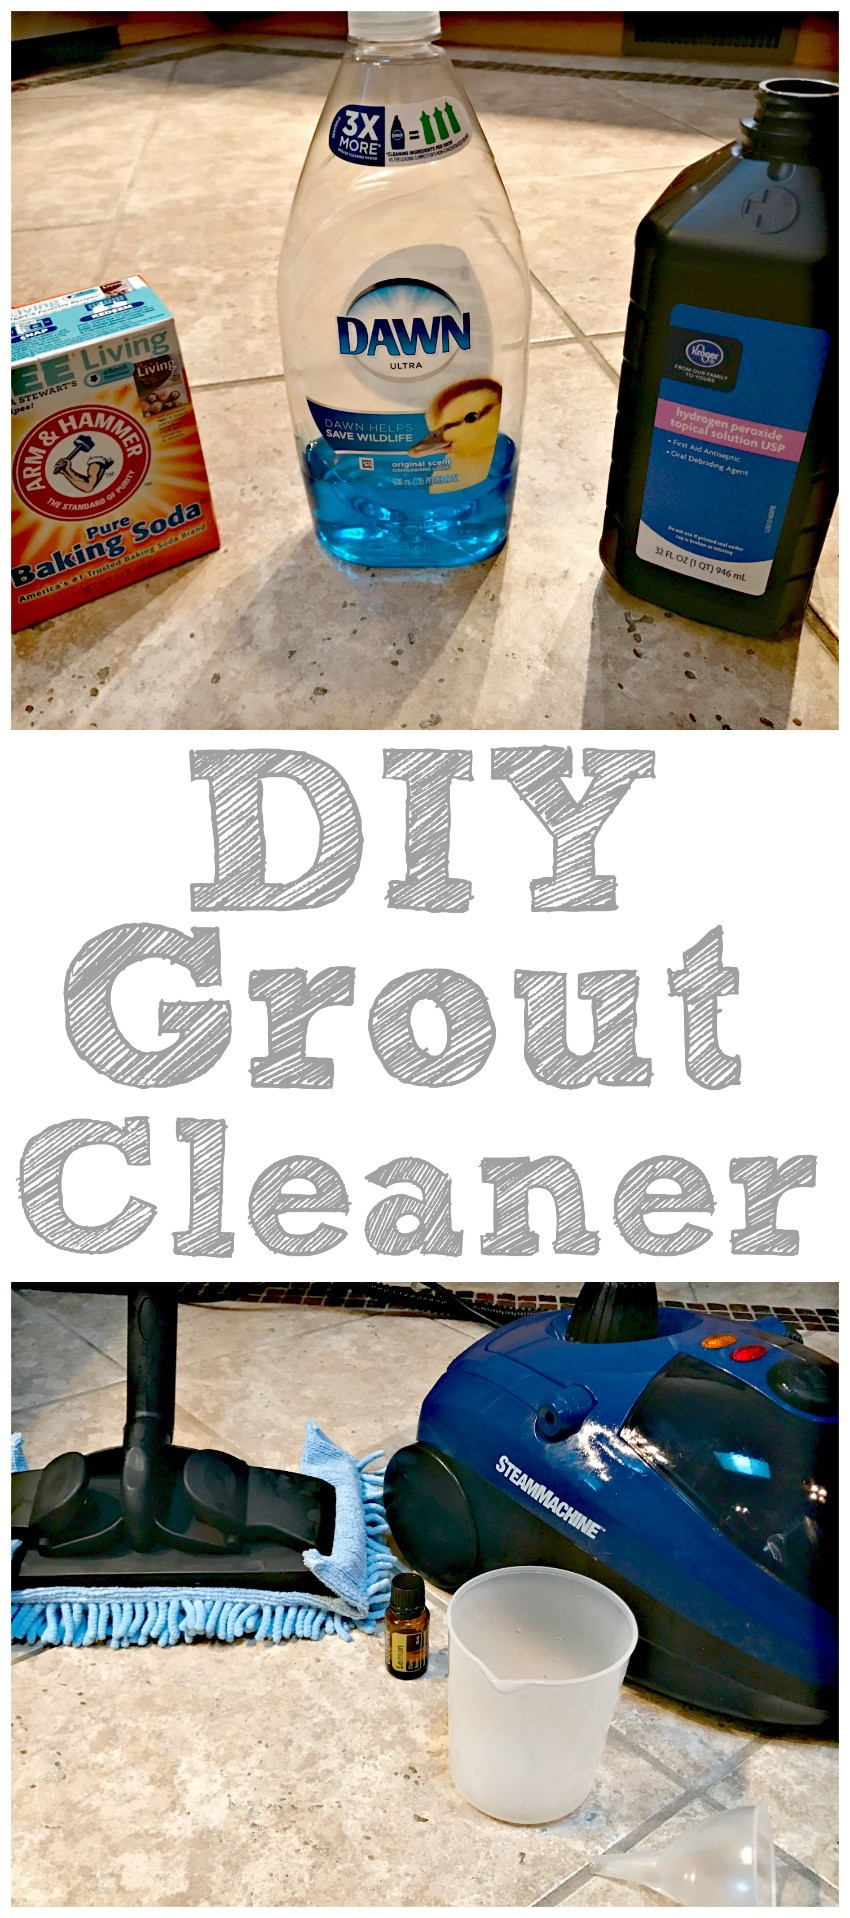 Kitchen Tile Grout Cleaner
 DIY Tile Grout Cleaner The Cards We Drew